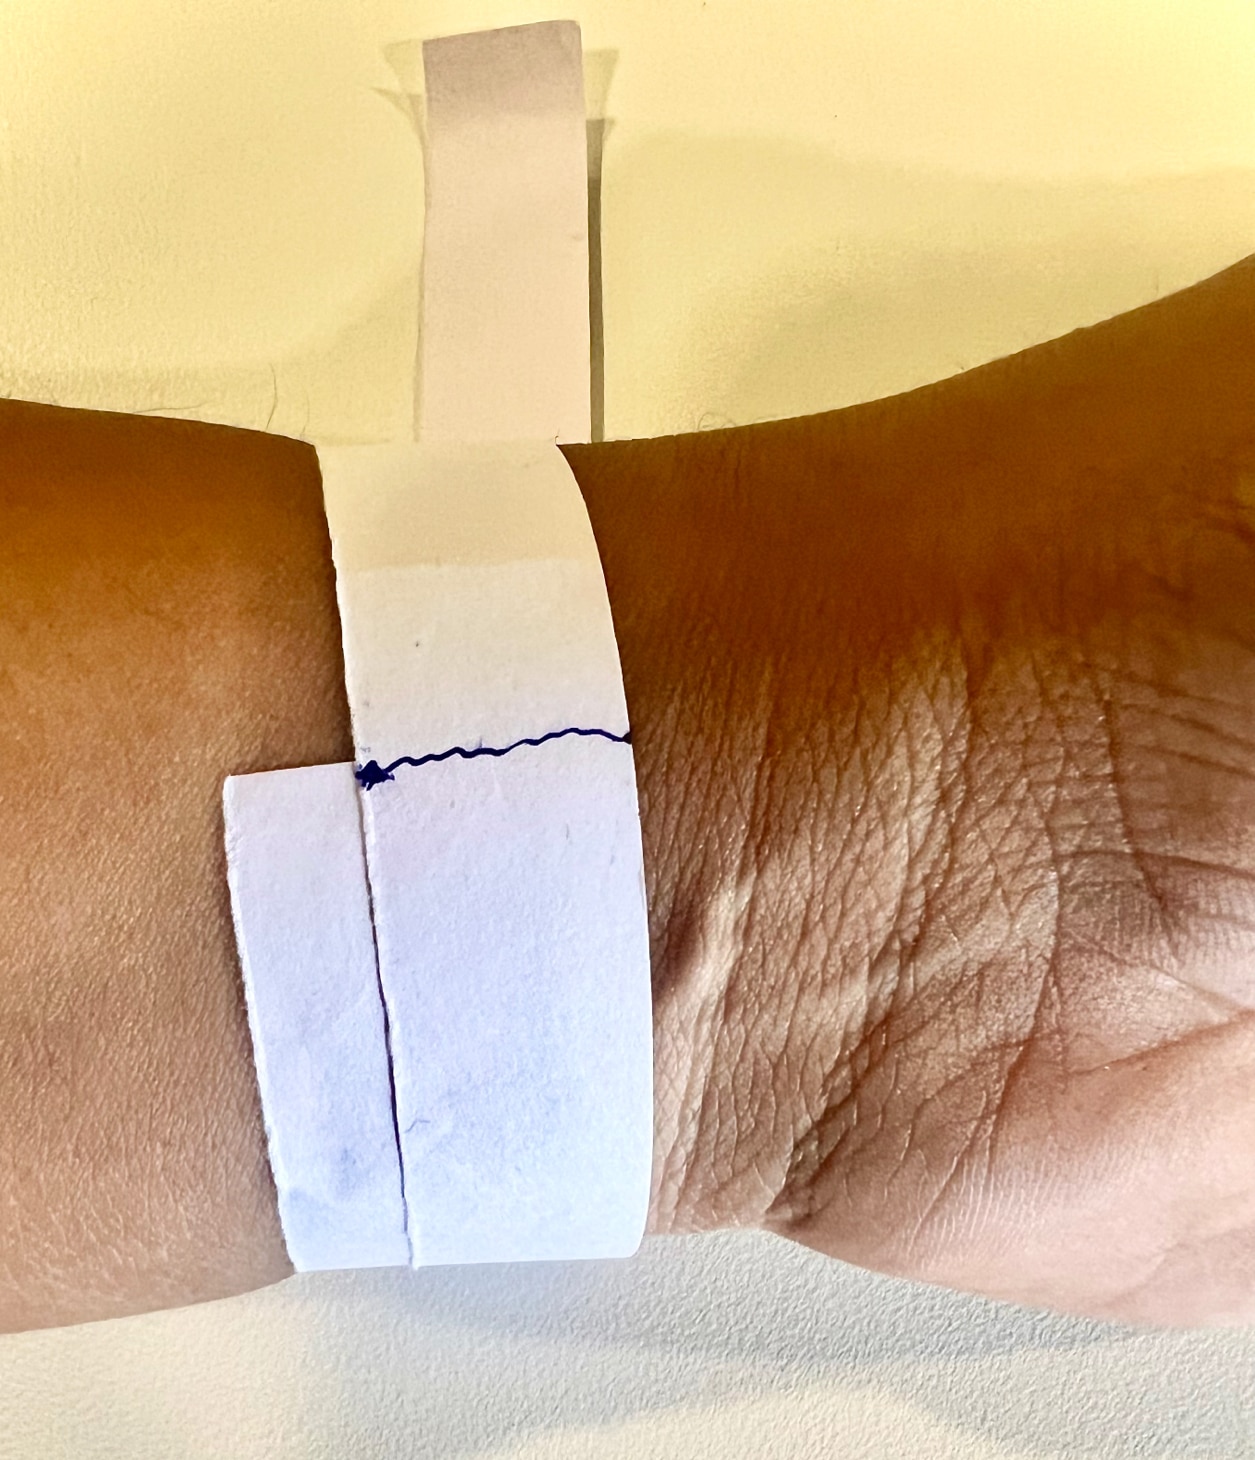 Measure your wrist with a ruler, paper, and pen